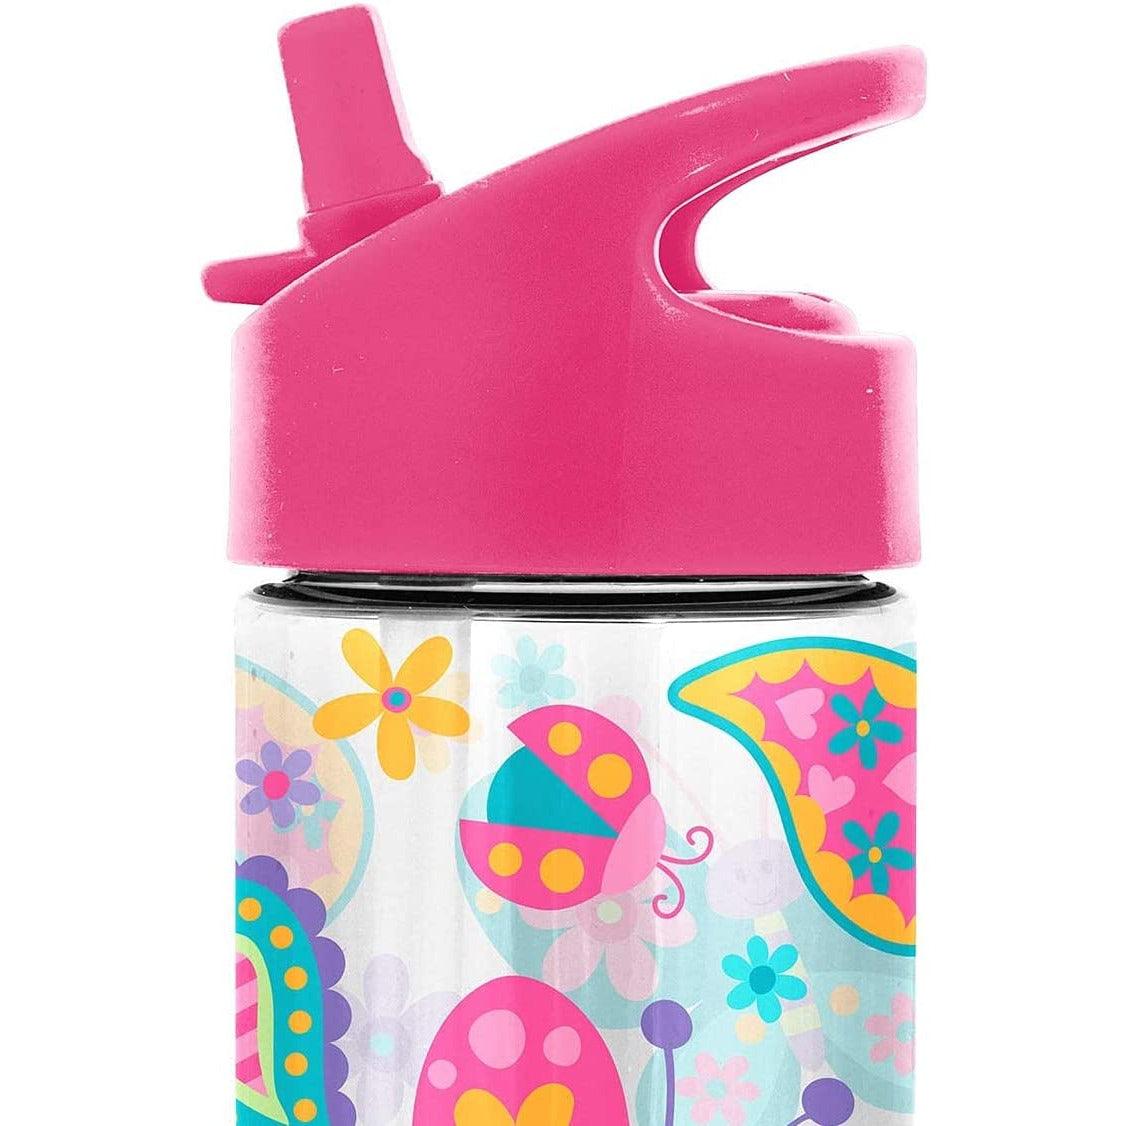 Stephen Joseph Sip And Snack Butterfly Water Bottle - BumbleToys - 5-7 Years, Cecil, Girls, Pre-Order, School Supplies, Water Bottle